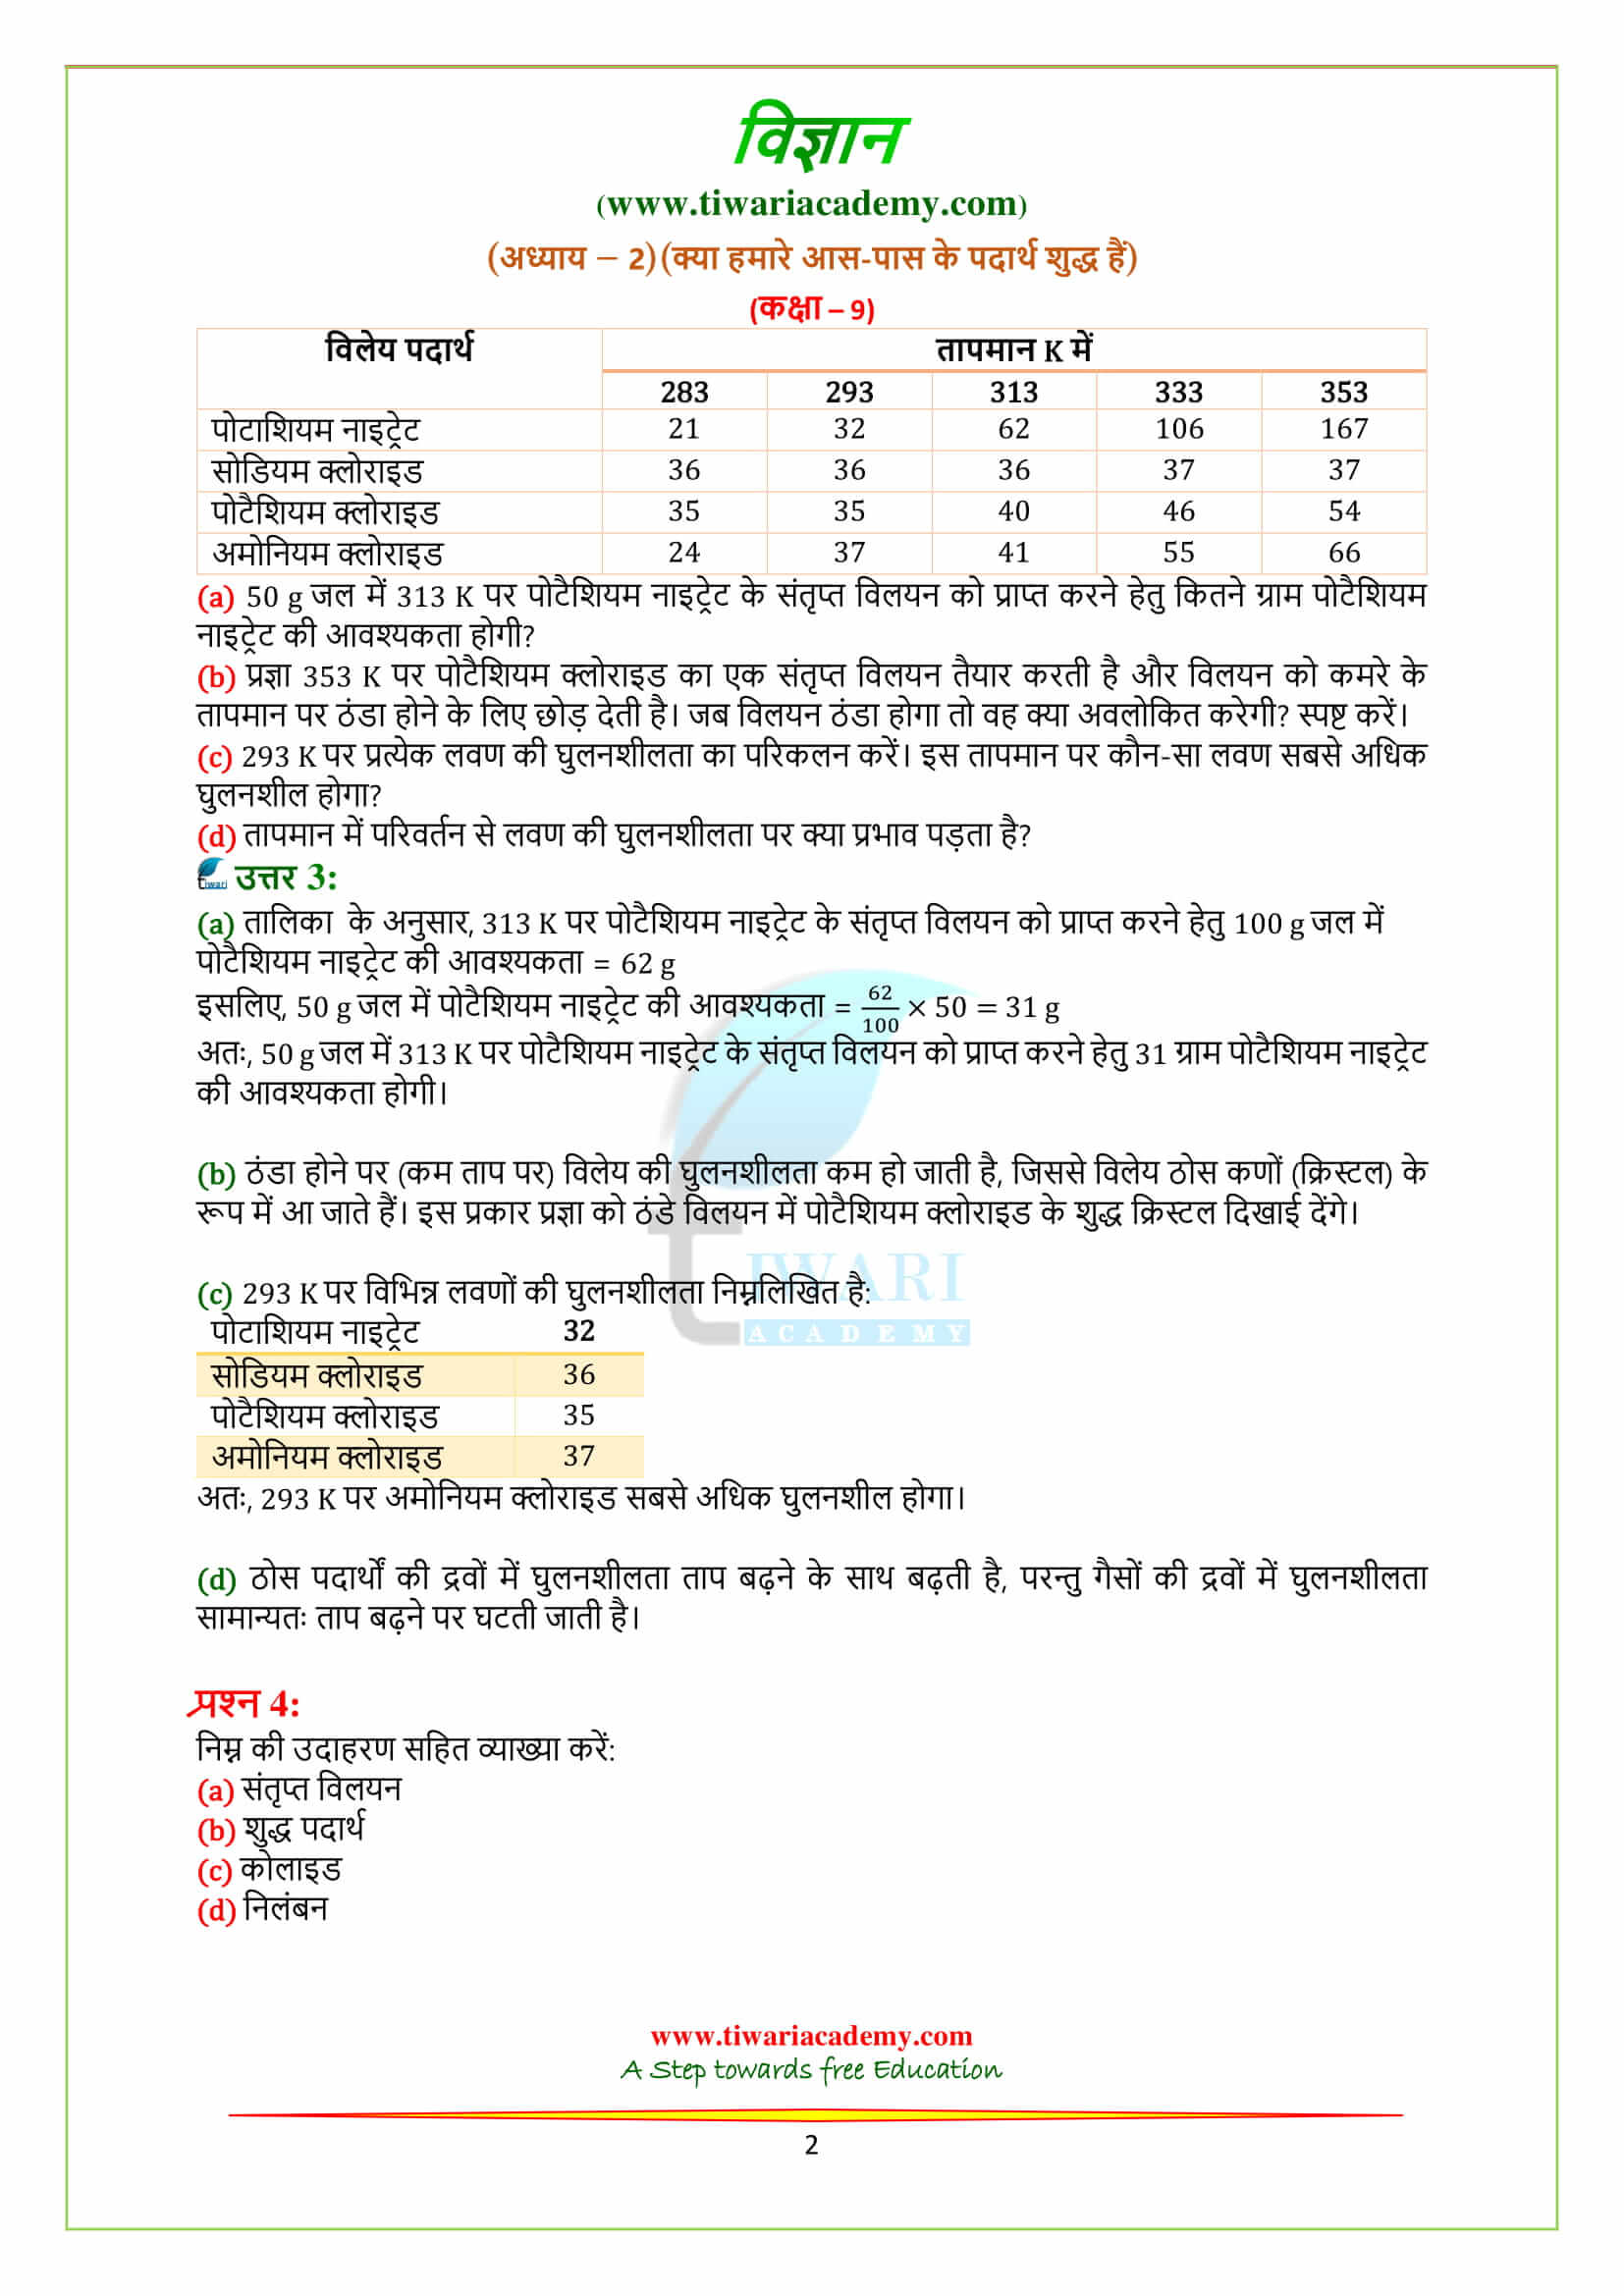 NCERT Solutions for Class 9 Science Chapter 2 guide in hindi